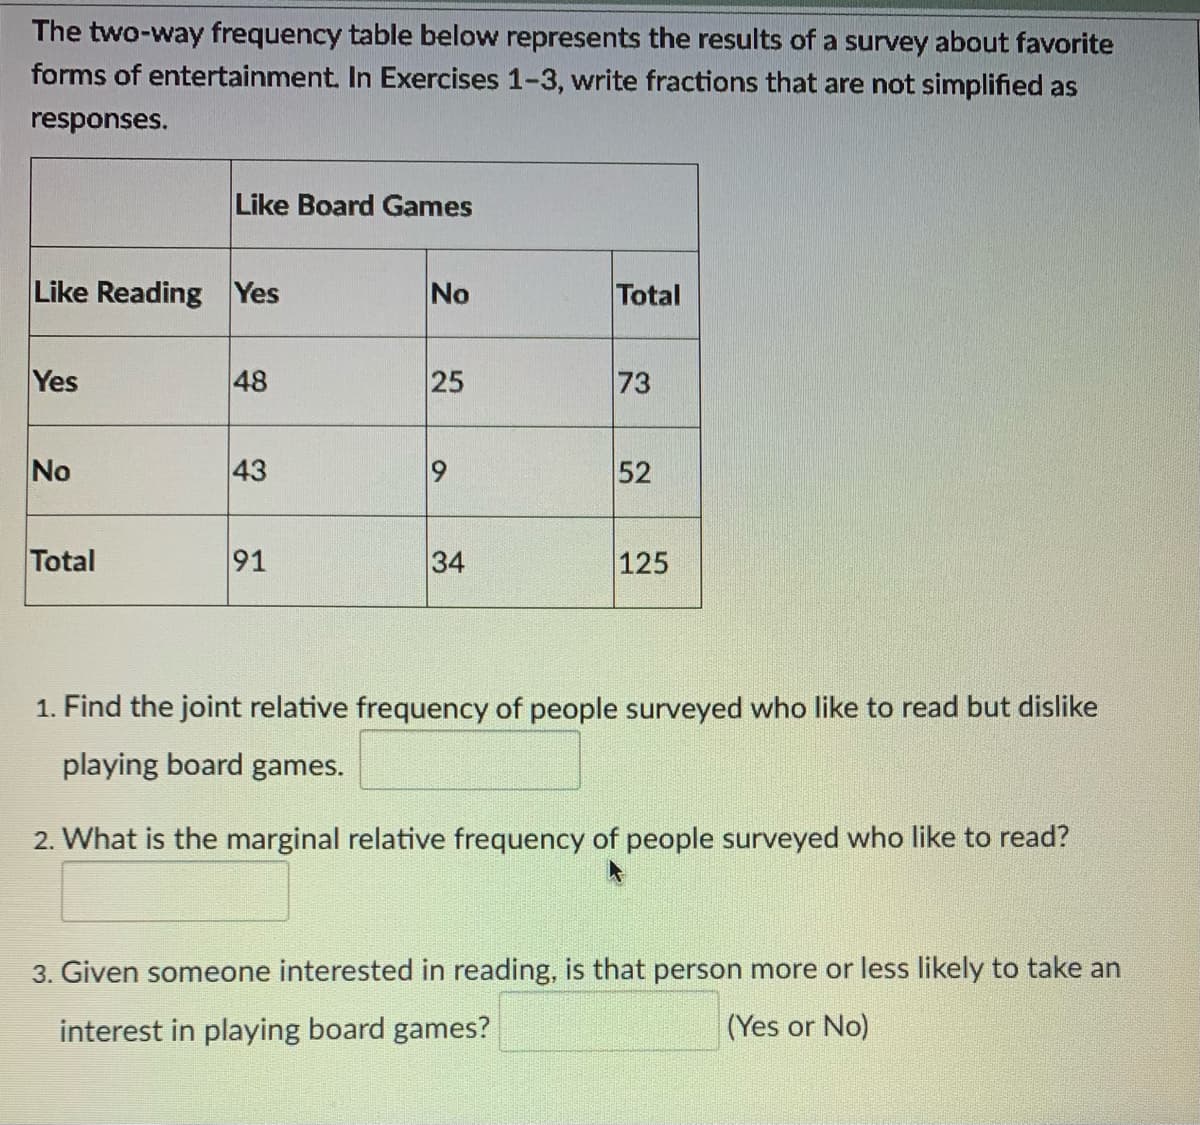 The two-way frequency table below represents the results of a survey about favorite
forms of entertainment. In Exercises 1-3, write fractions that are not simplified as
responses.
Like Board Games
Like Reading Yes
No
Total
Yes
48
25
73
No
43
52
Total
91
34
125
1. Find the joint relative frequency of people surveyed who like to read but dislike
playing board games.
2. What is the marginal relative frequency of people surveyed who like to read?
3. Given someone interested in reading, is that person more or less likely to take an
interest in playing board games?
(Yes or No)
